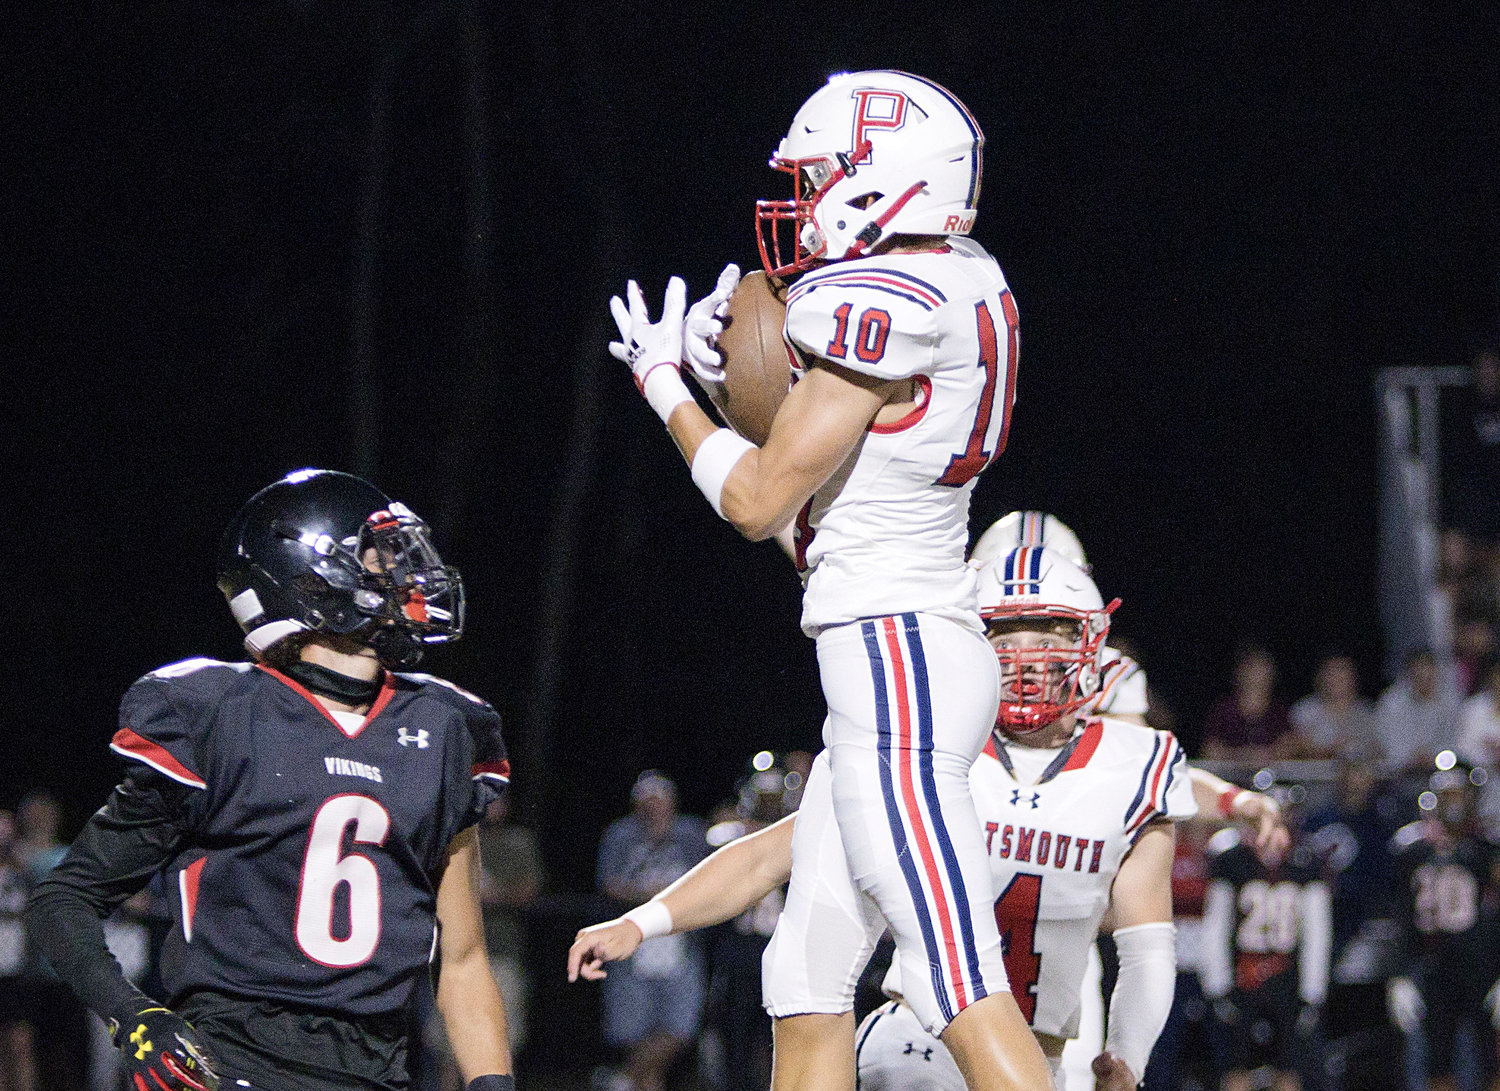 The Patriots’ Evan Tullson intercepts a pass during the Vikings’ first possession of the game, which led to a touchdown for Portsmouth.